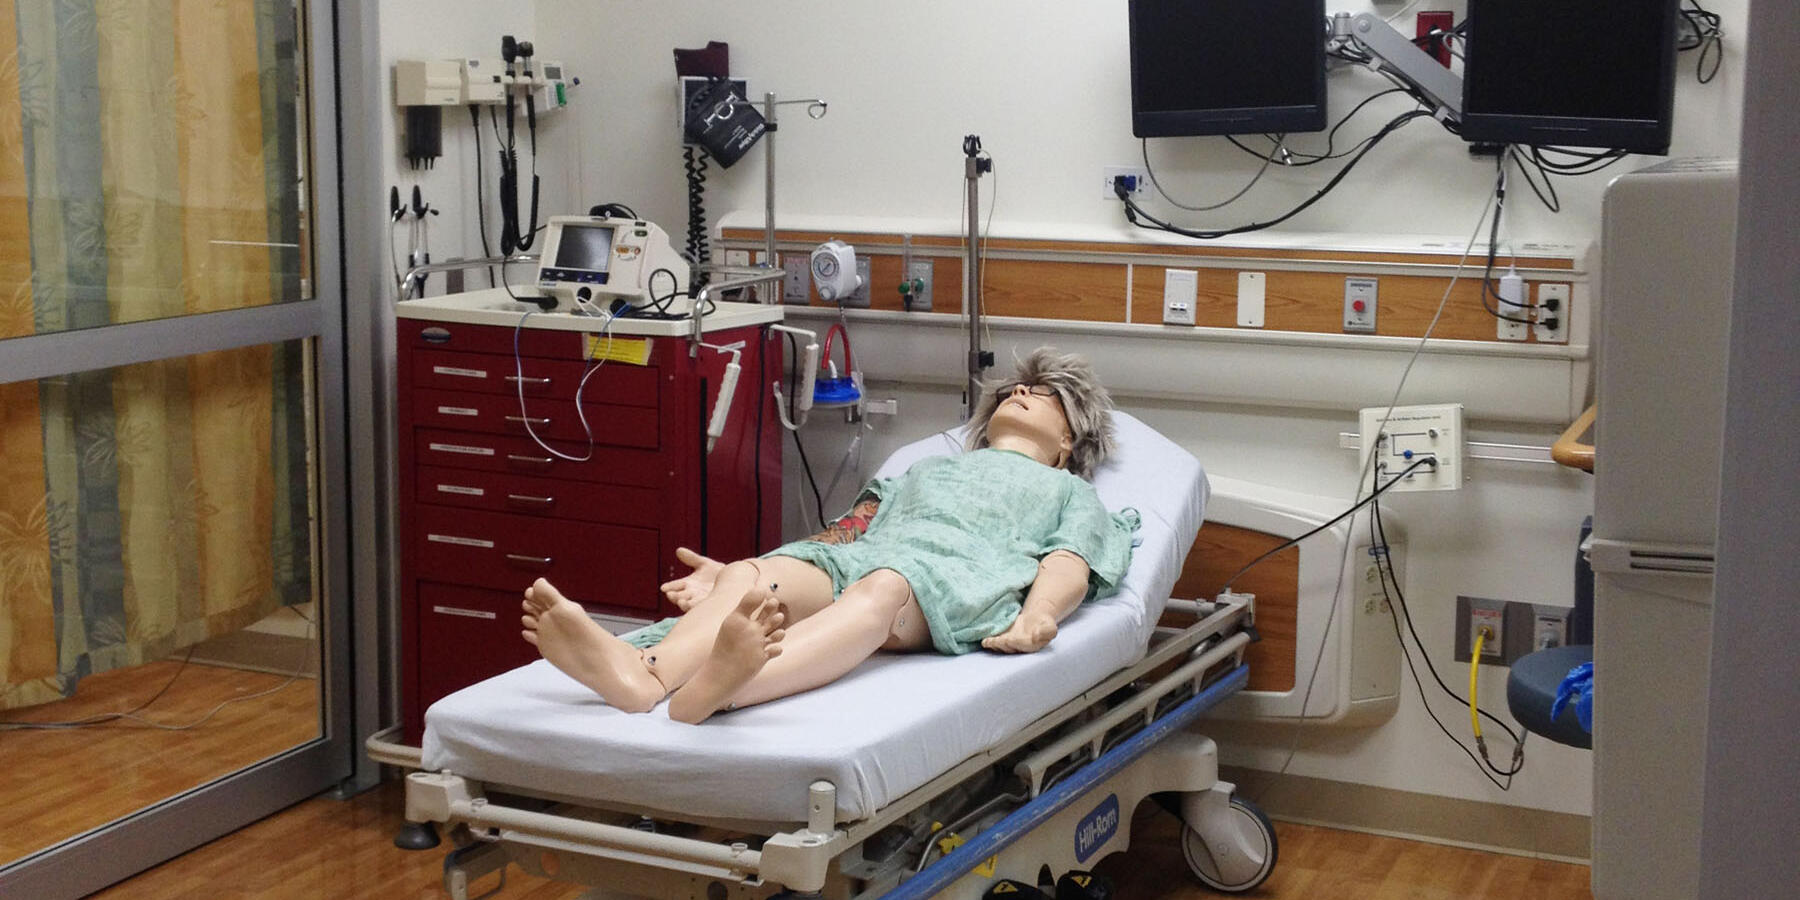 Science Lab Construction - Northshore Simulation Center patient room with medical equipment